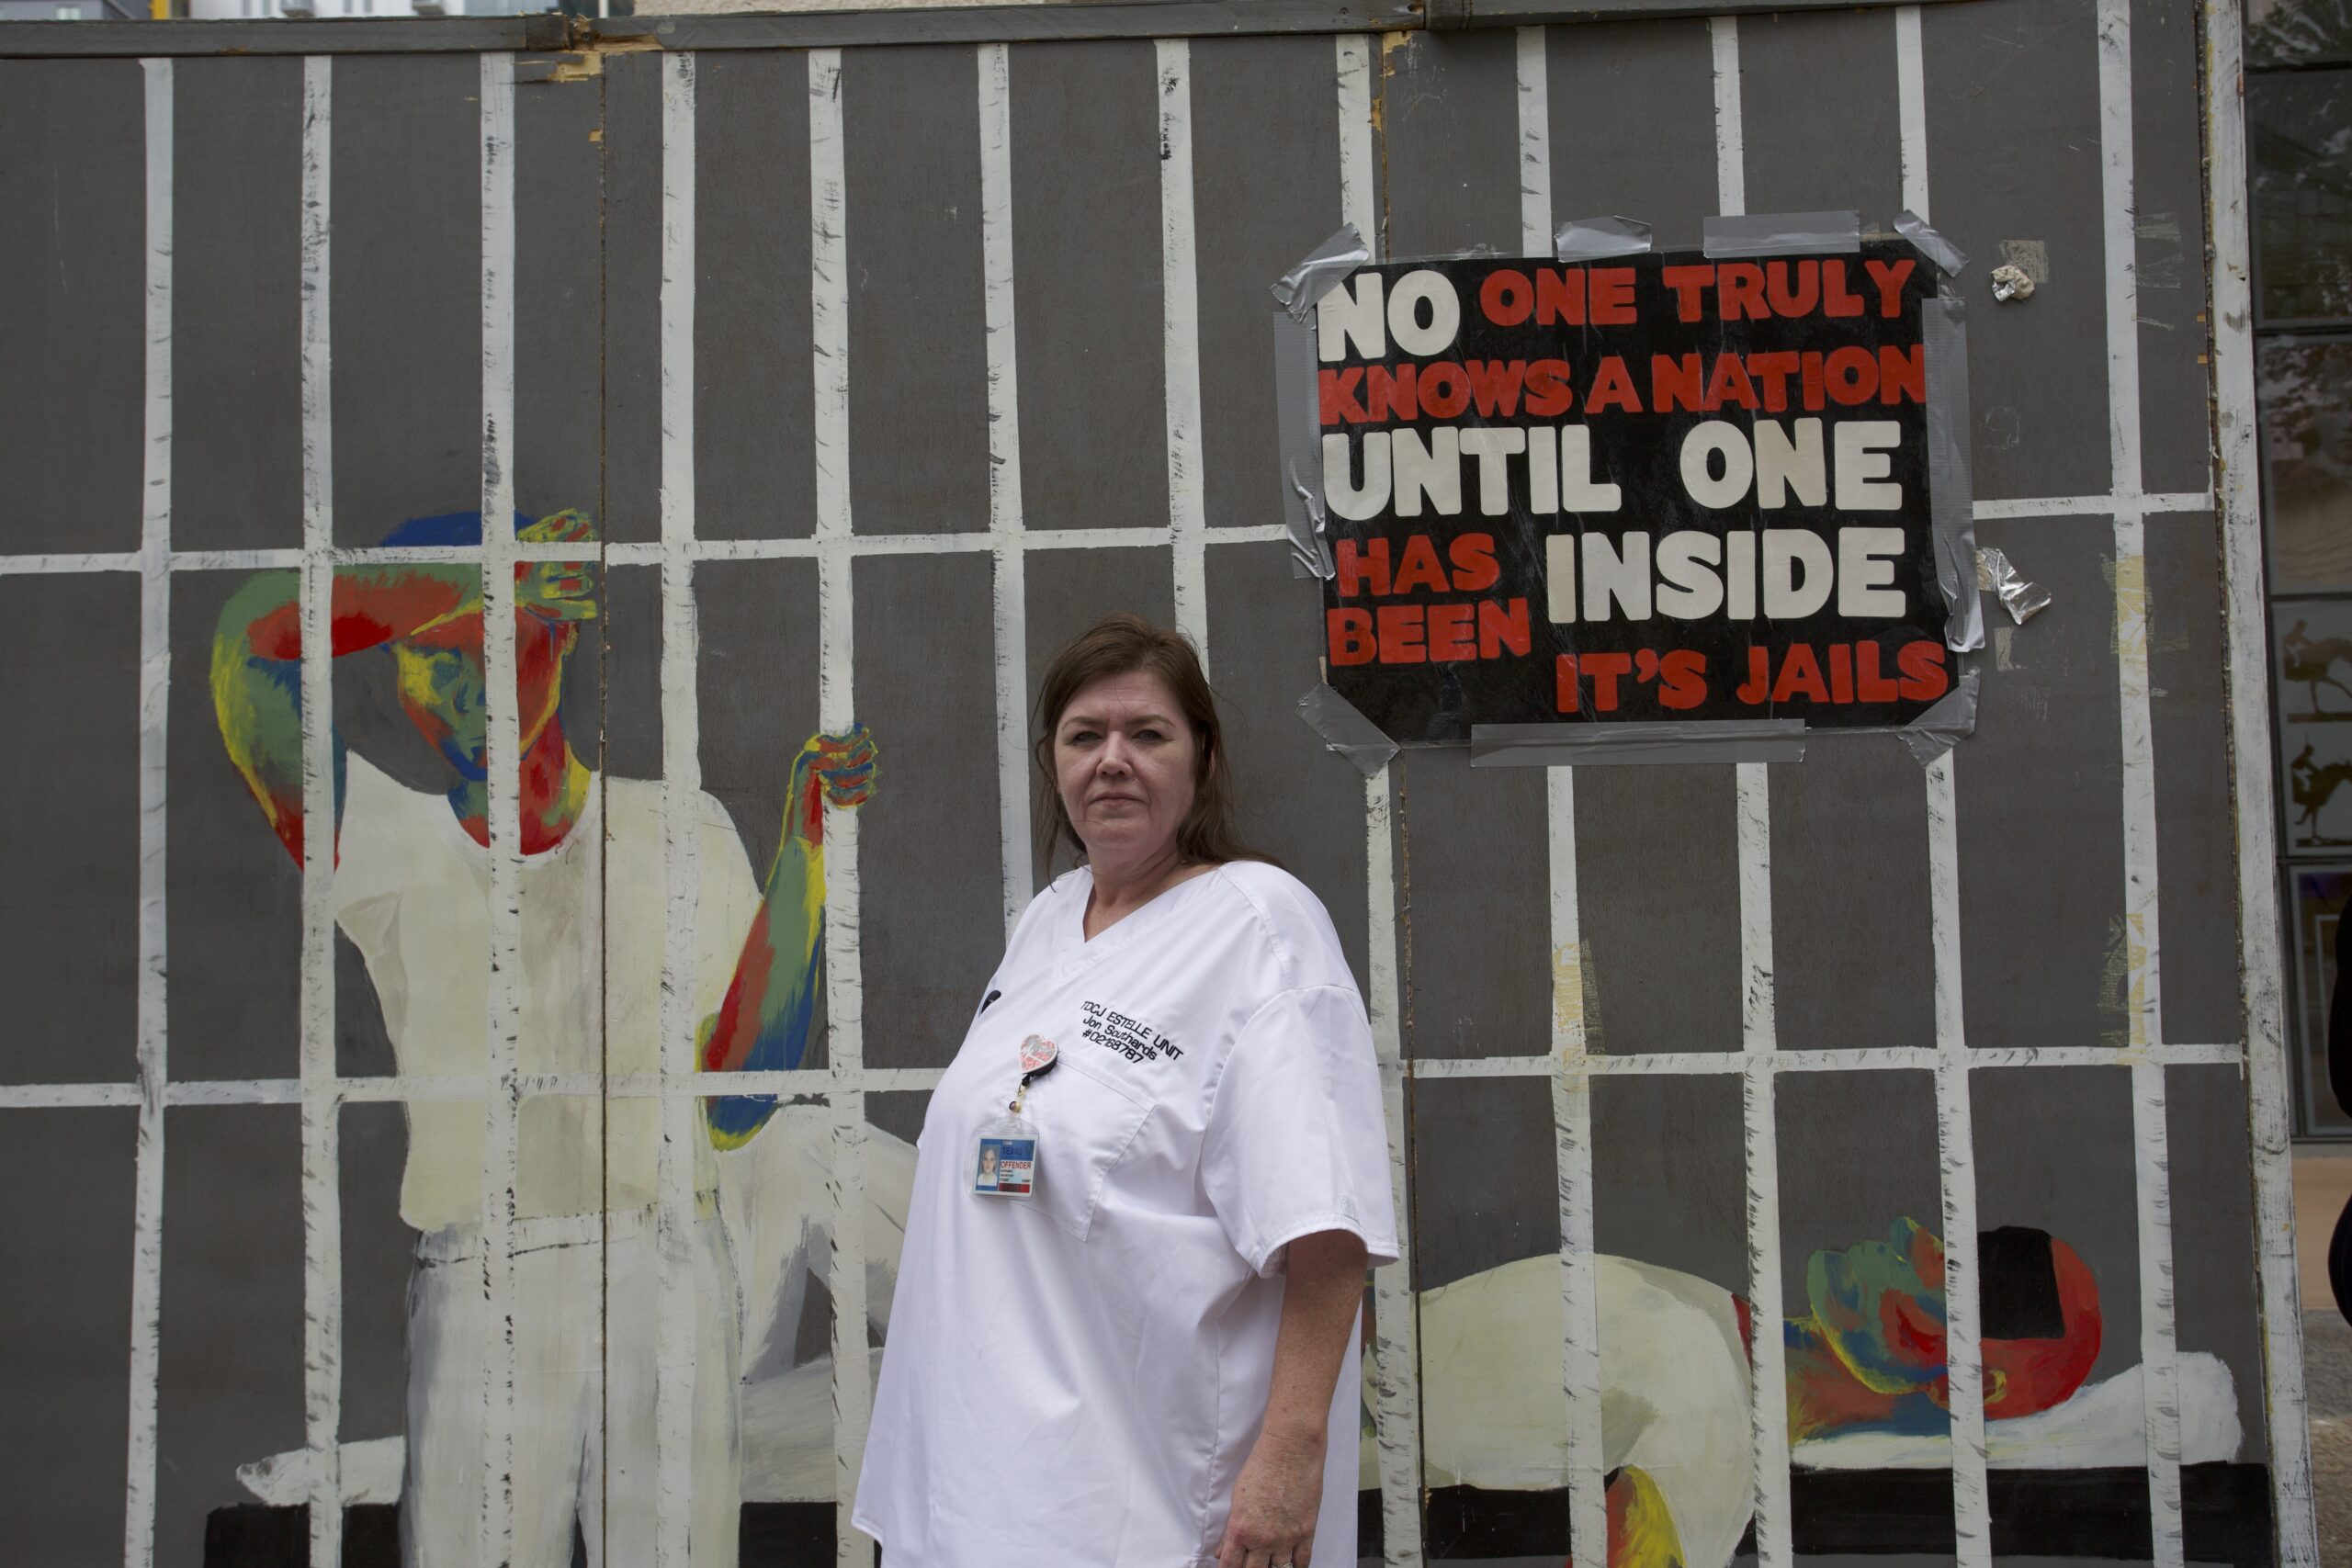 Tona Southards-Naranjo stands in front of a mural that depicts a hot prison cell. A sign reads "No one truly knows a nation until one has been inside its jails."